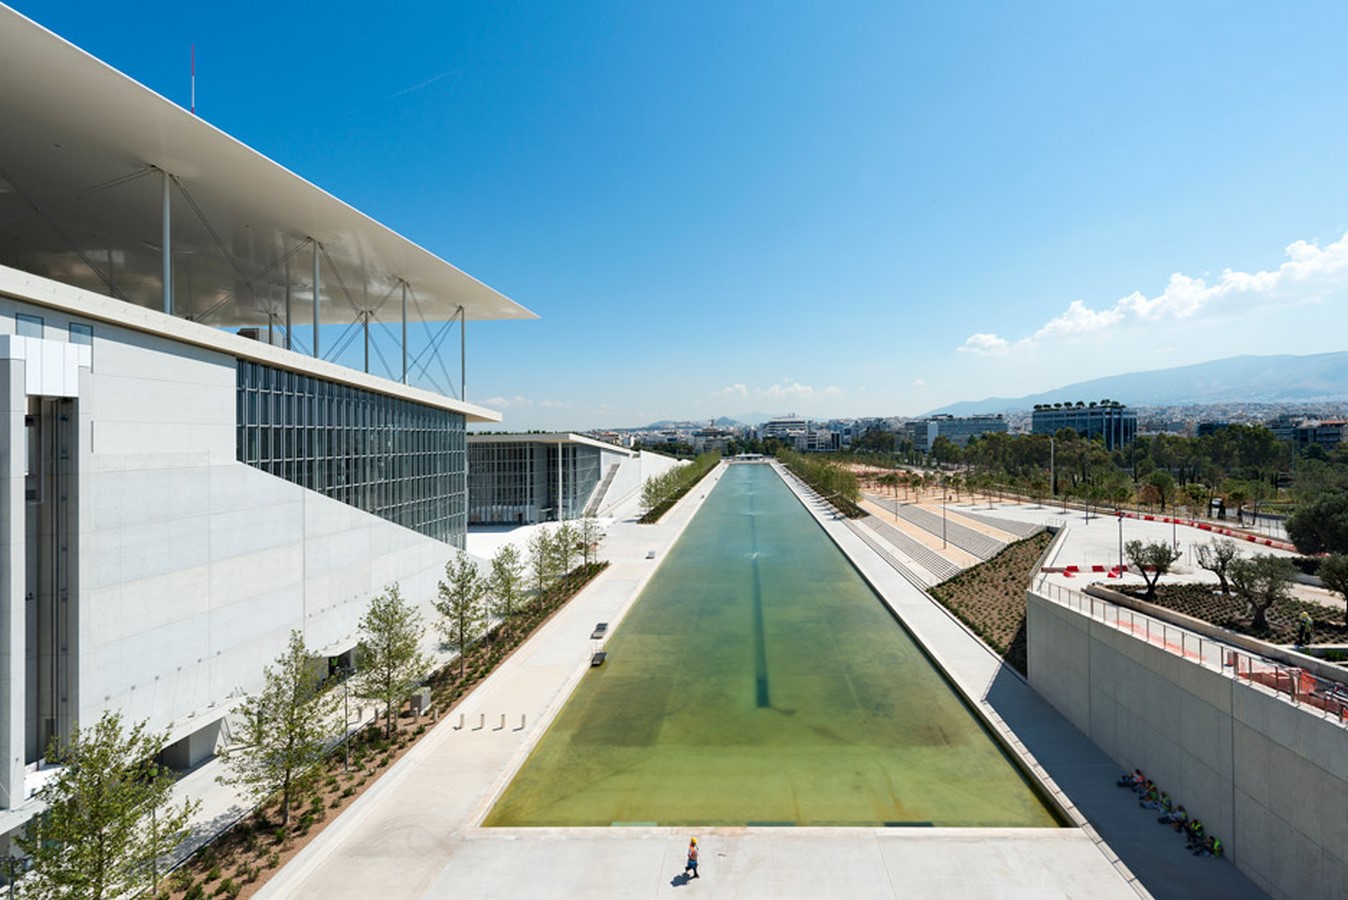 The Canal - ©snfcc